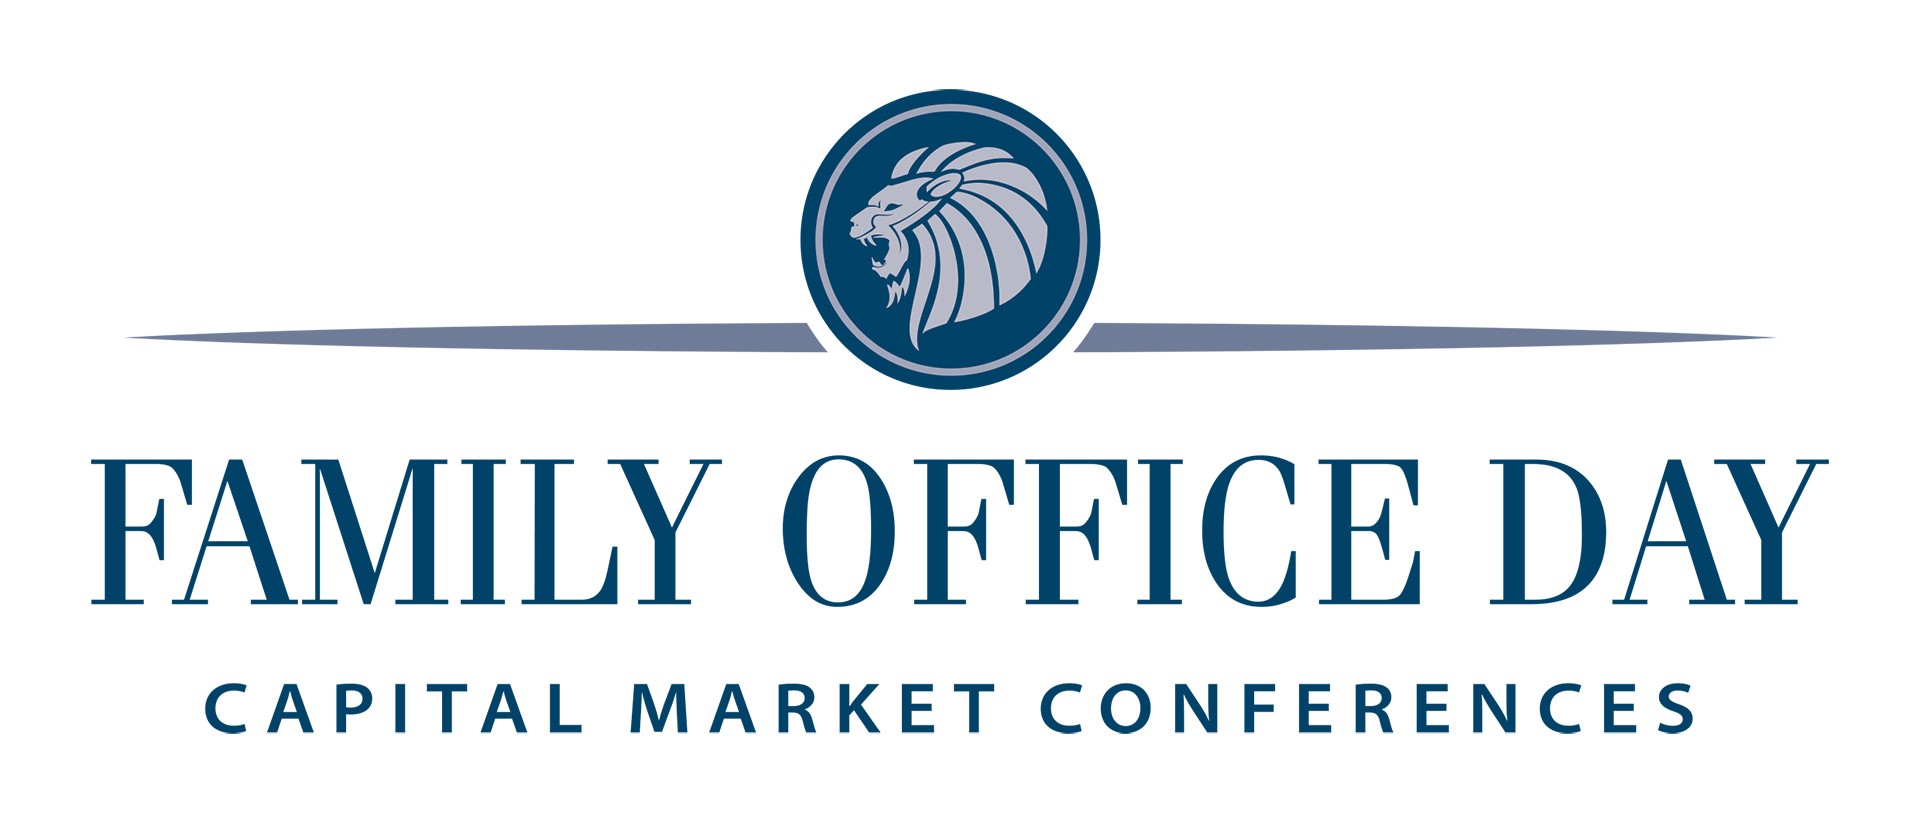 Capital Market Conference Family Office Day organized by Advantage Finance